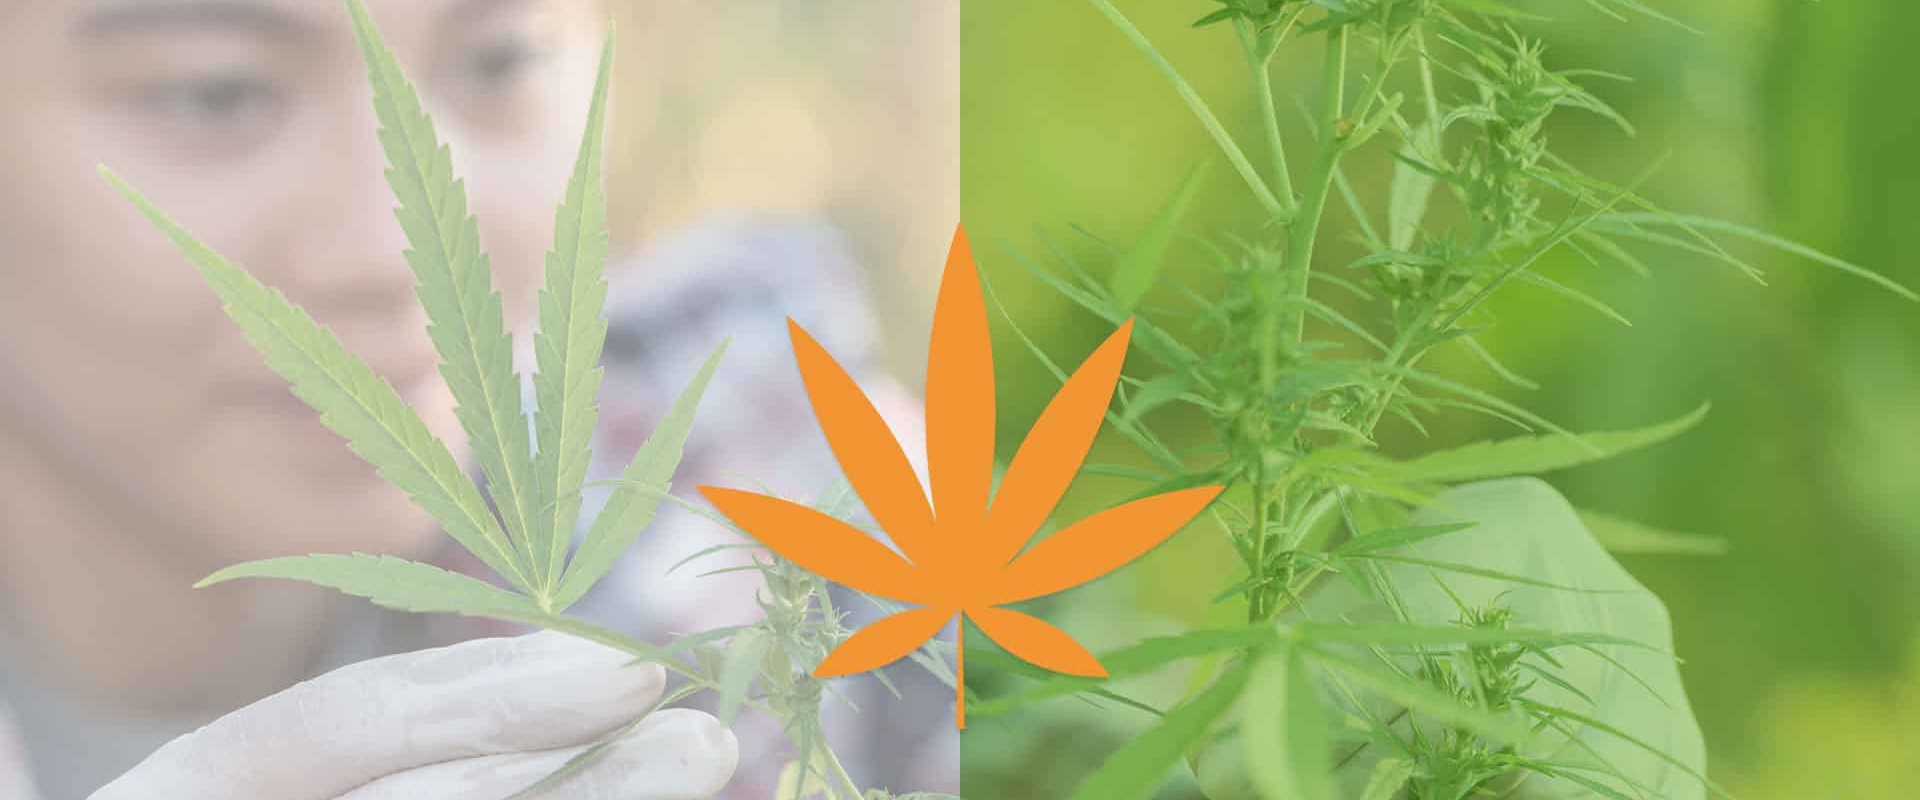 The Truth About CBD: Natural vs. Synthetic - An Expert's Perspective